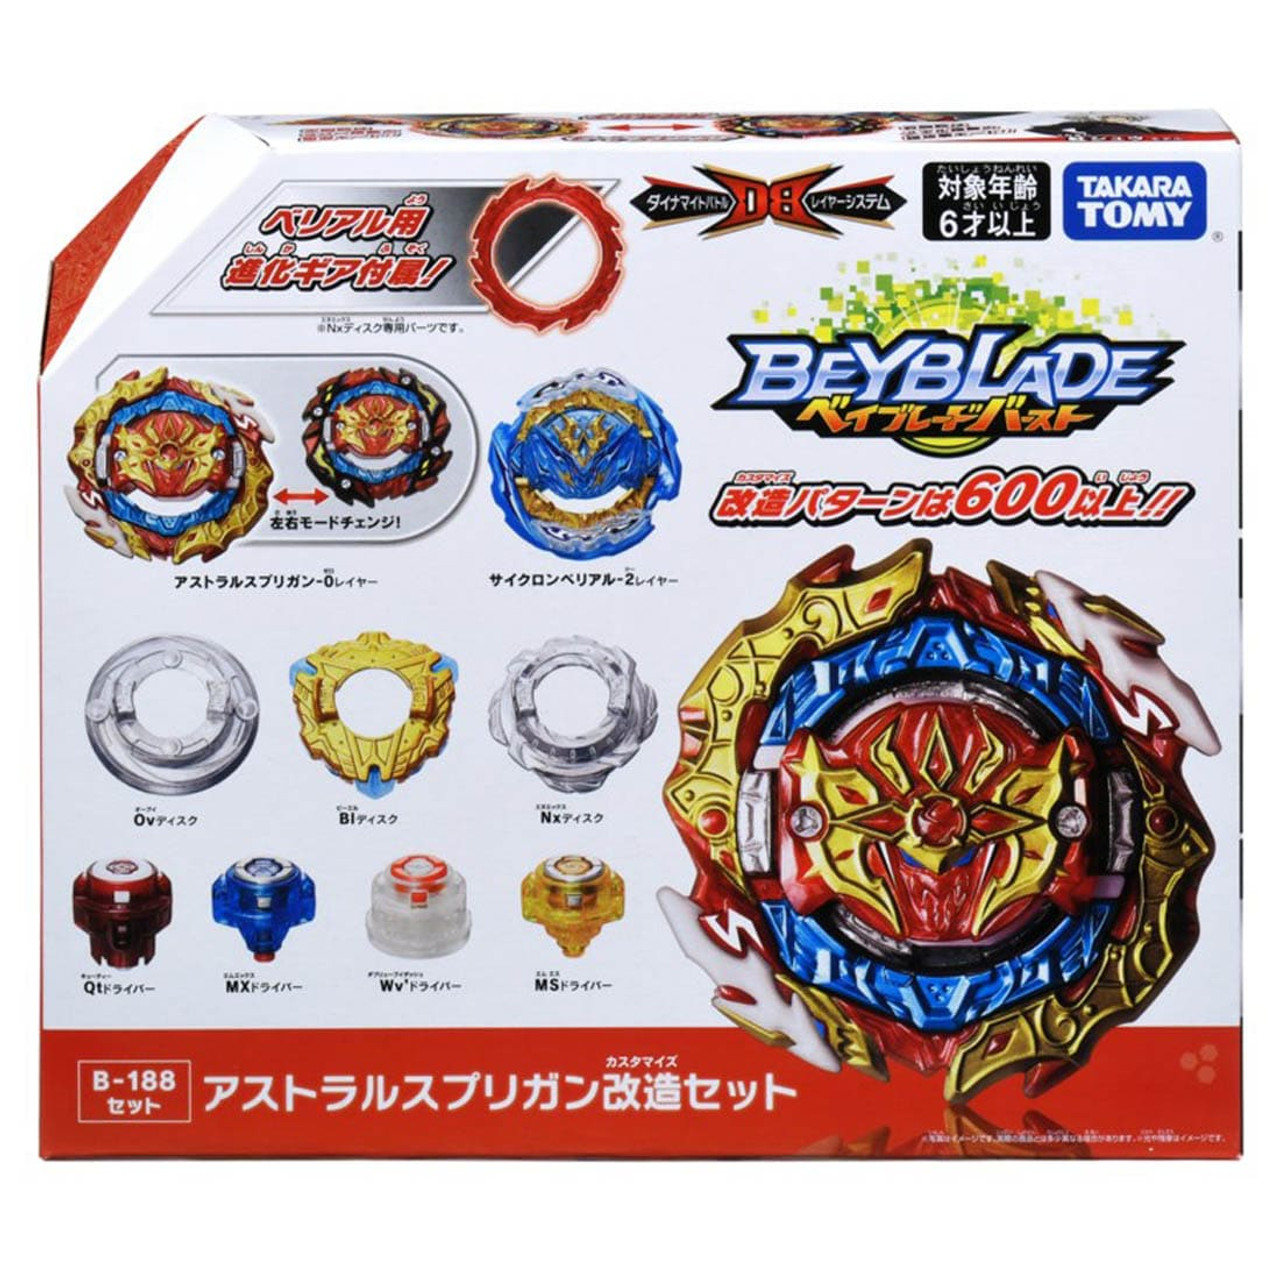 Burst dynamite beyblade What are